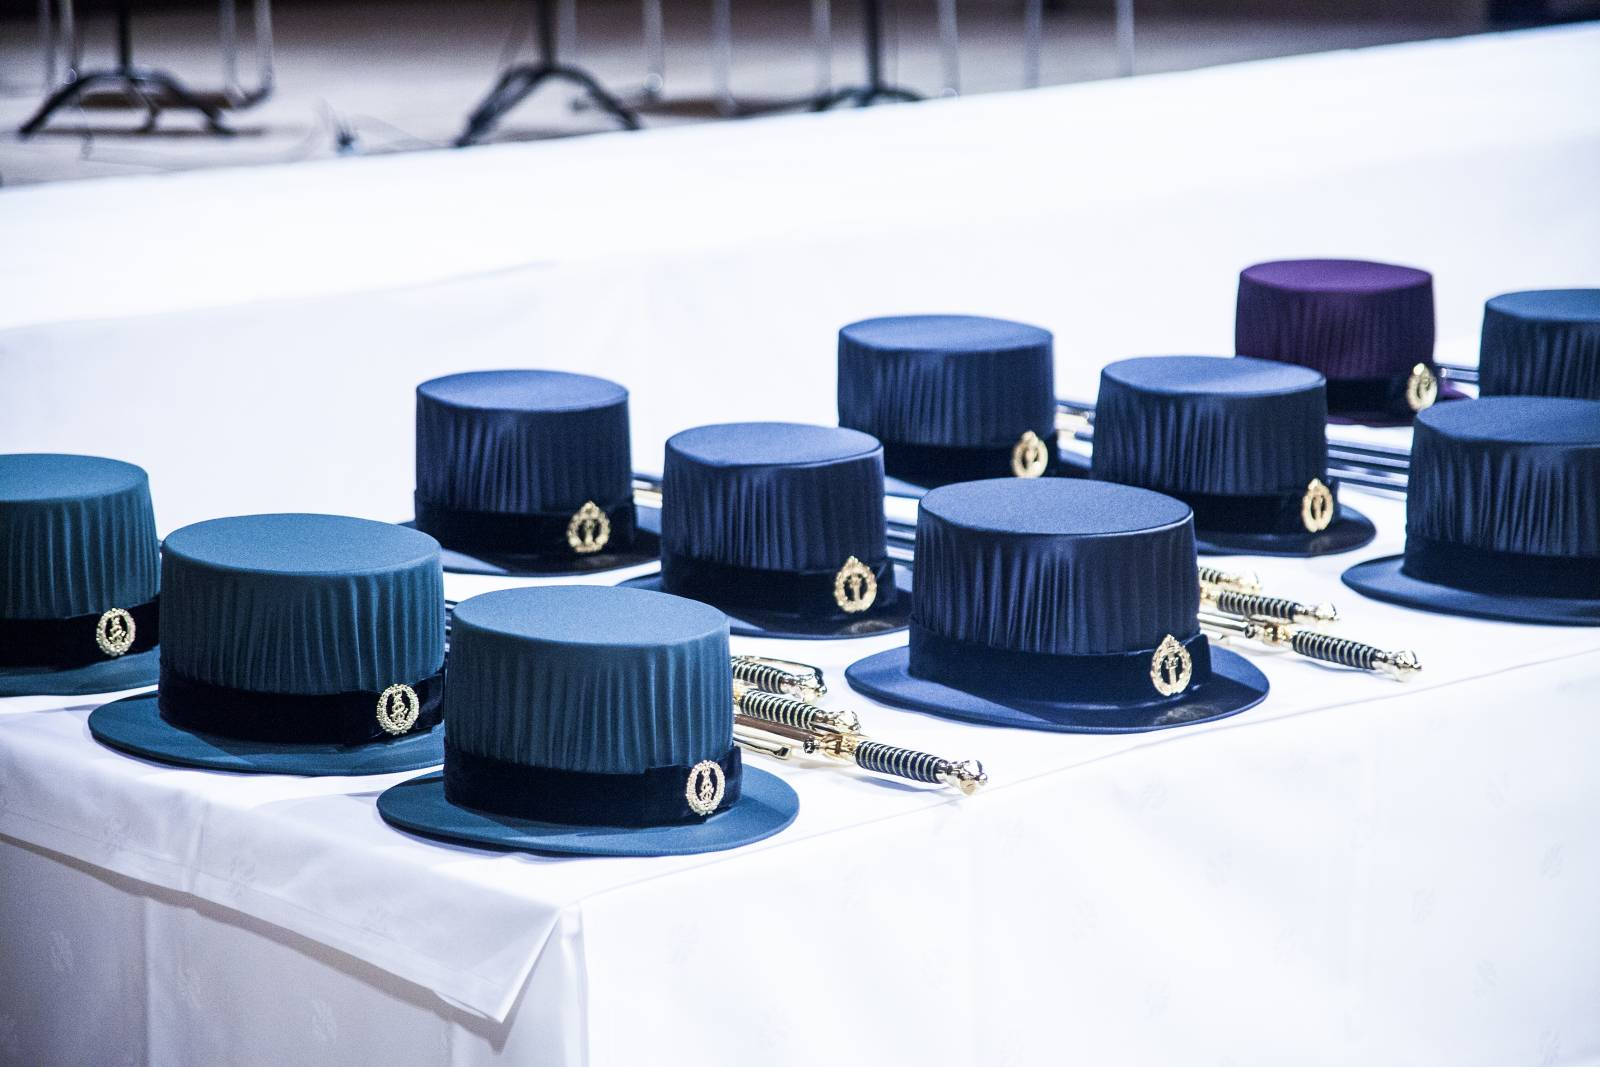 Siliter hats and swords on a white tablecloth for doctoral promotion